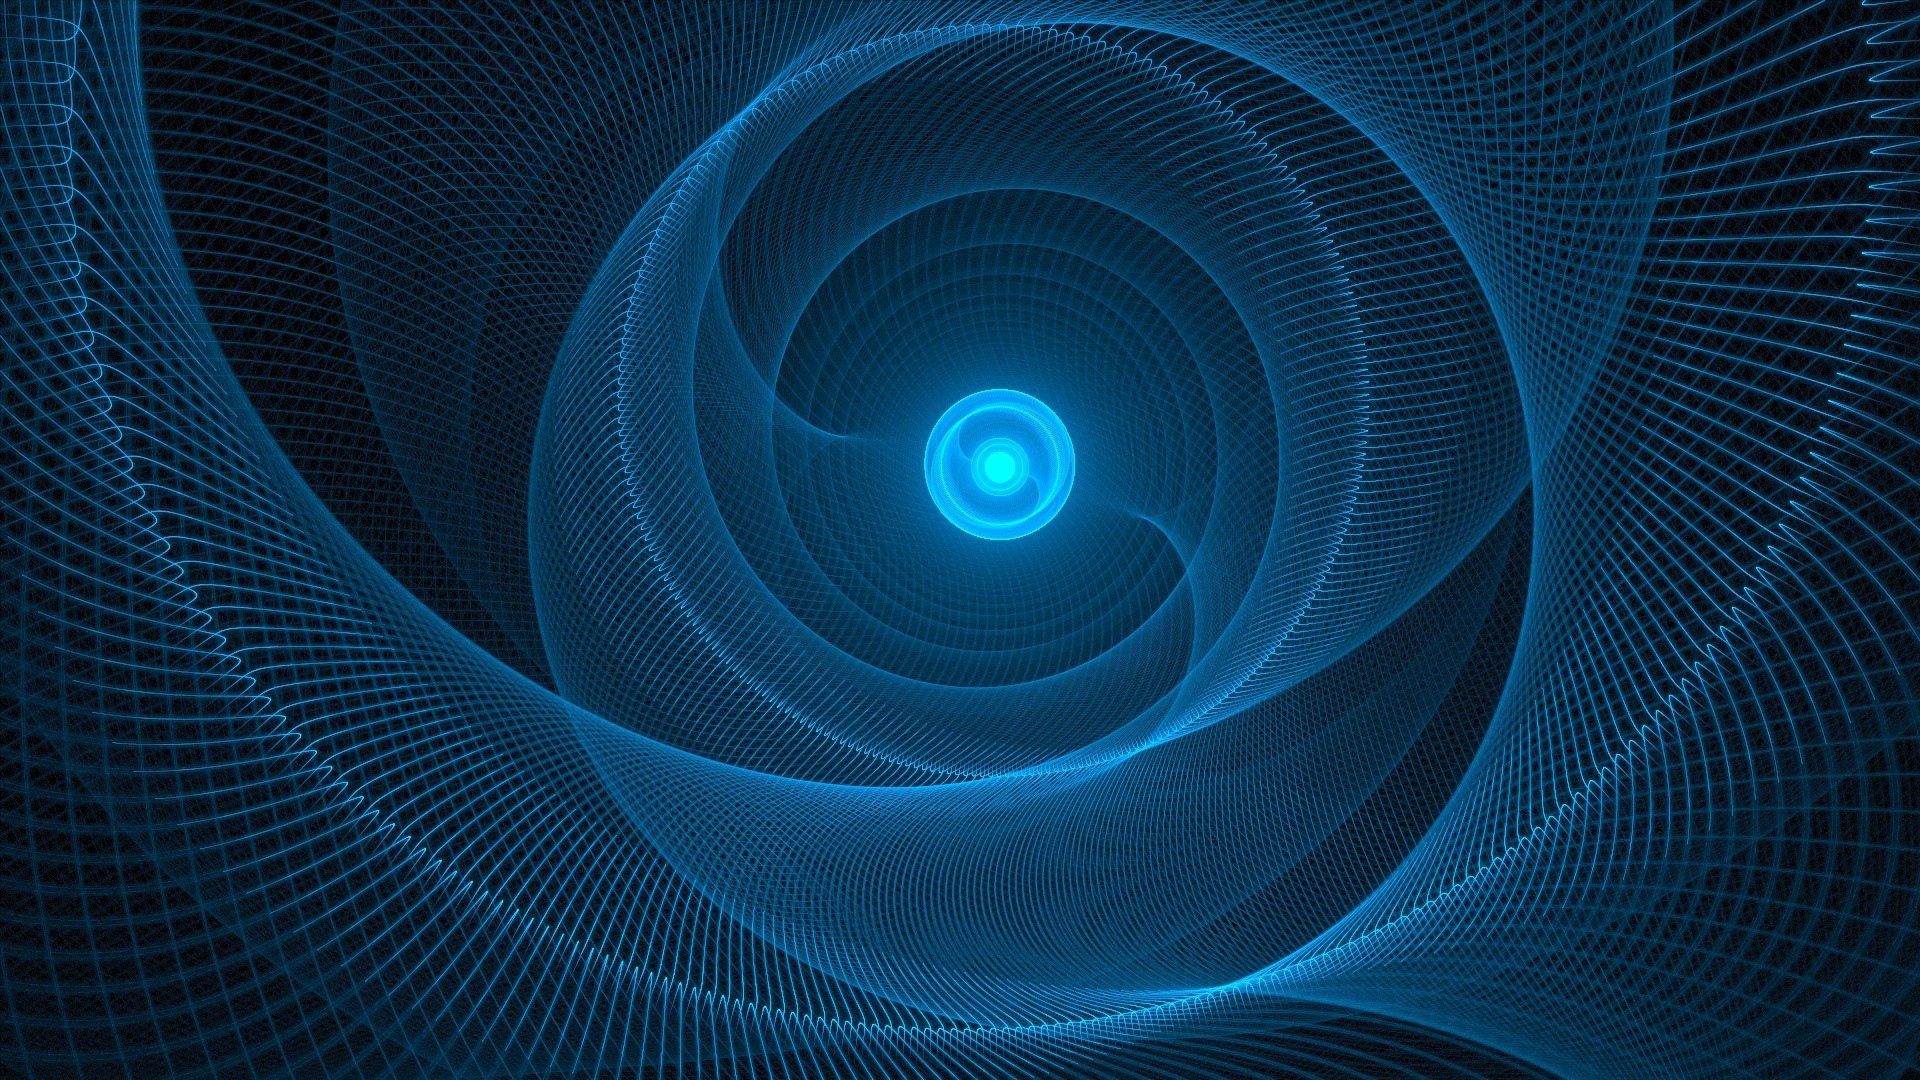 125684 Screensavers and Wallpapers Spiral for phone. Download abstract, blue, grid, rotation, spiral pictures for free